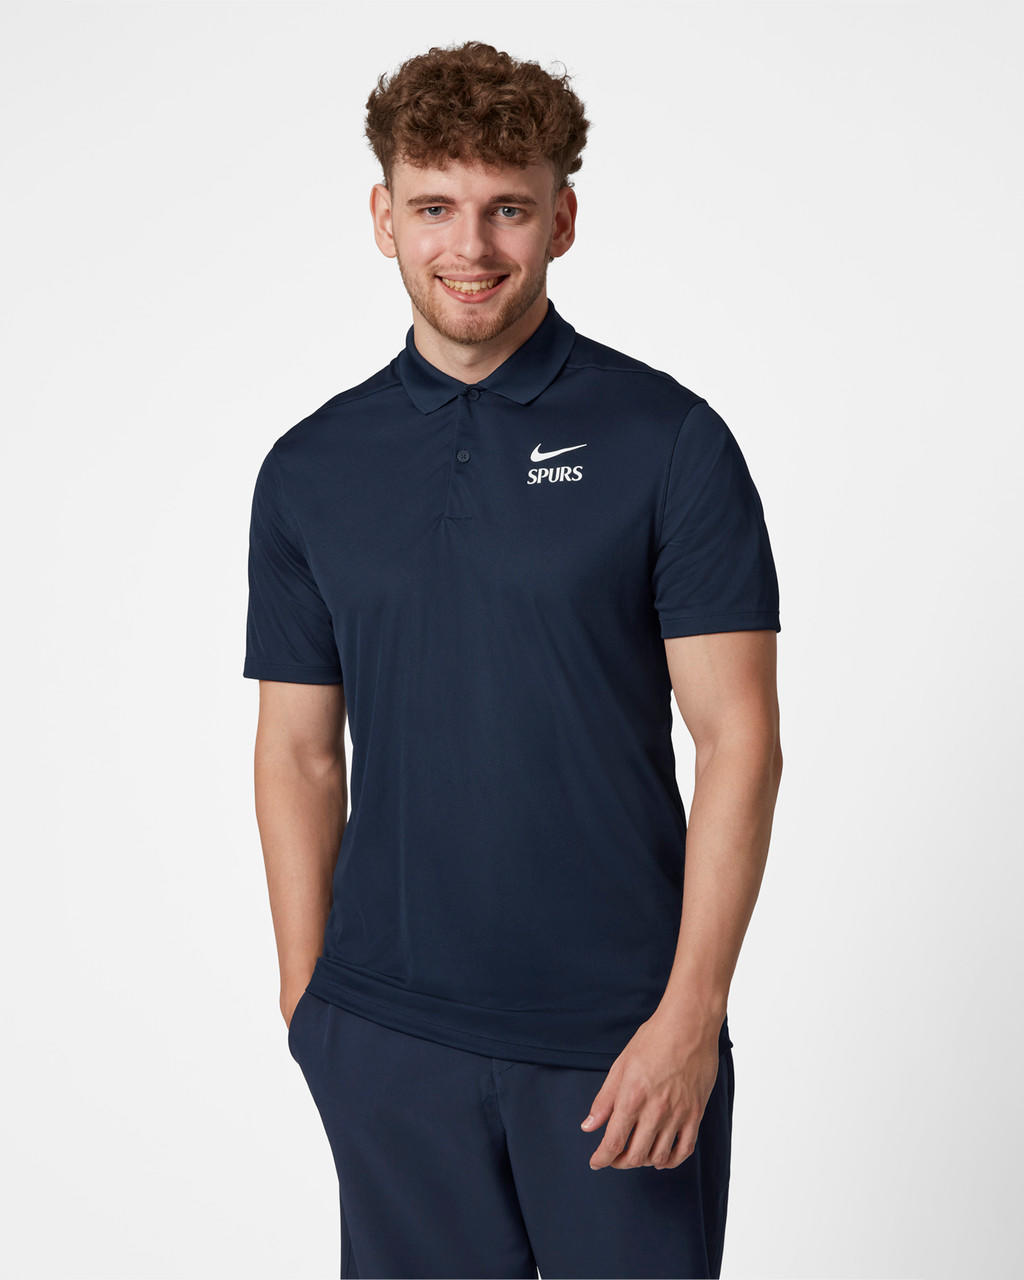 Spurs Nike Mens Navy Victory Golf Polo| Official Spurs Store